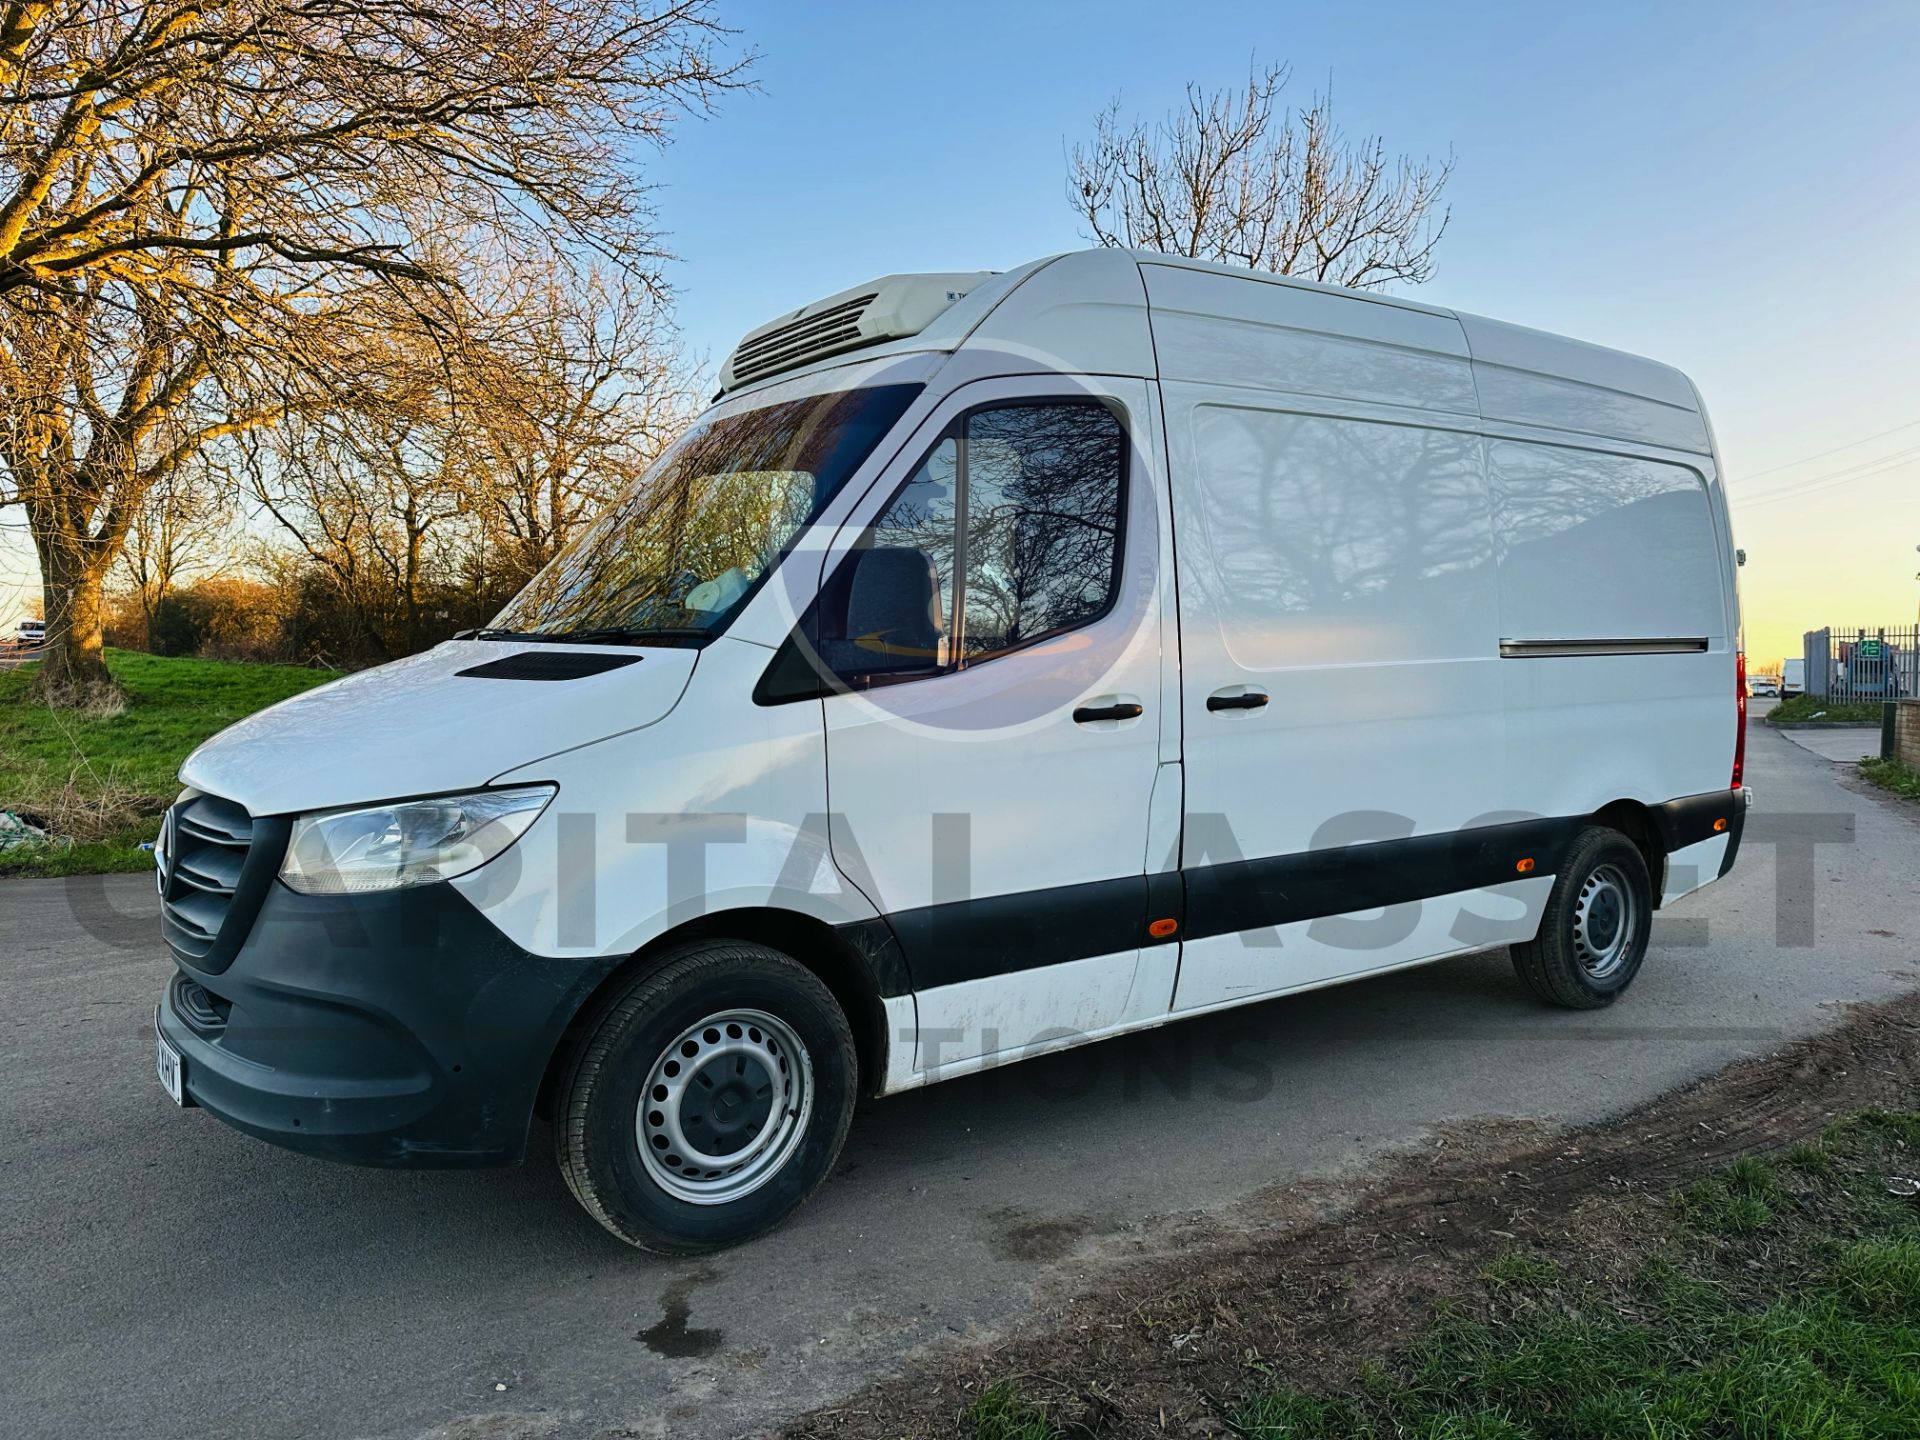 MERCEDES-BENZ SPRINTER 314 CDI *MWB - REFRIGERATED VAN* (2019 - FACELIFT MODEL) *OVERNIGHT STANDBY* - Image 5 of 33